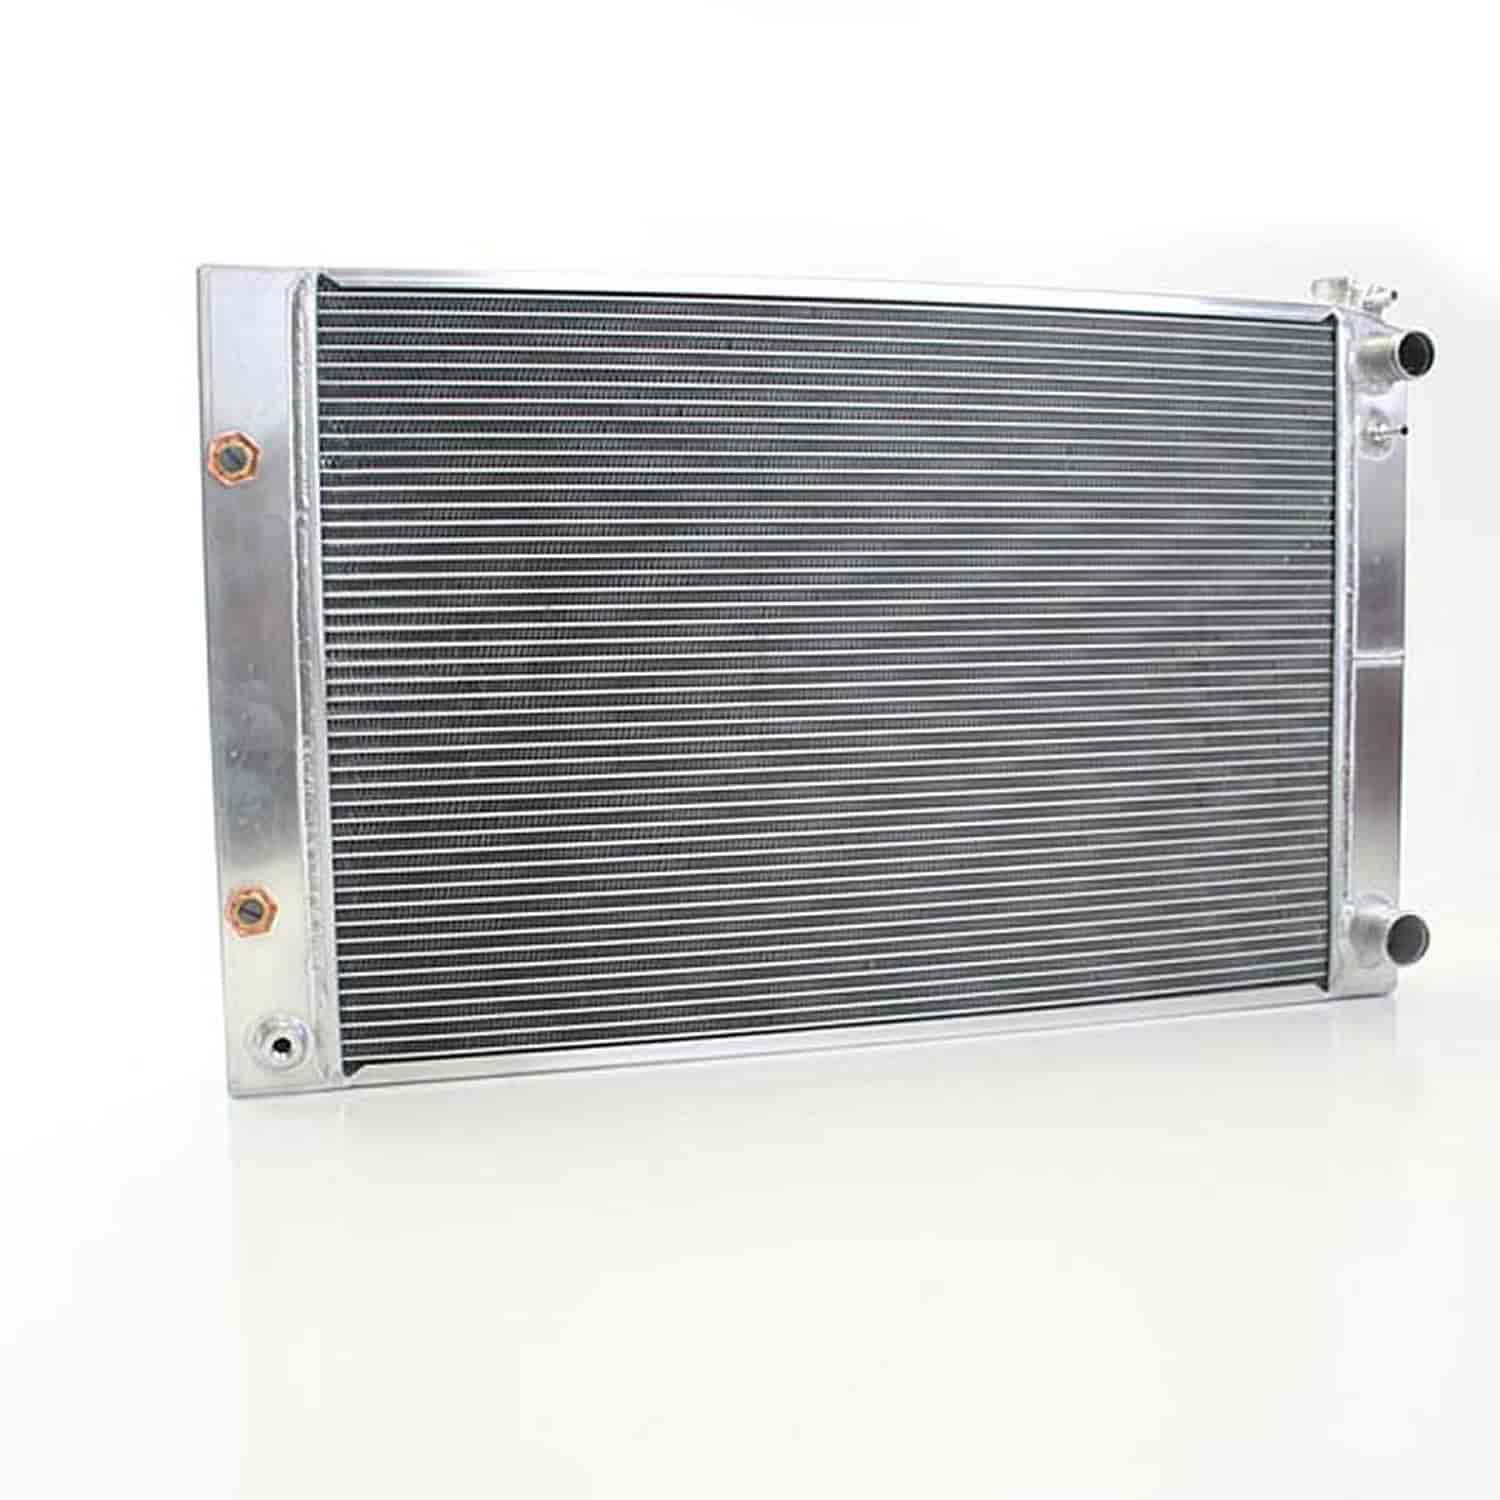 PerformanceFit Radiator 1969-1973 Ford Midsize & Mustang with Transmission Cooler for LS Swap